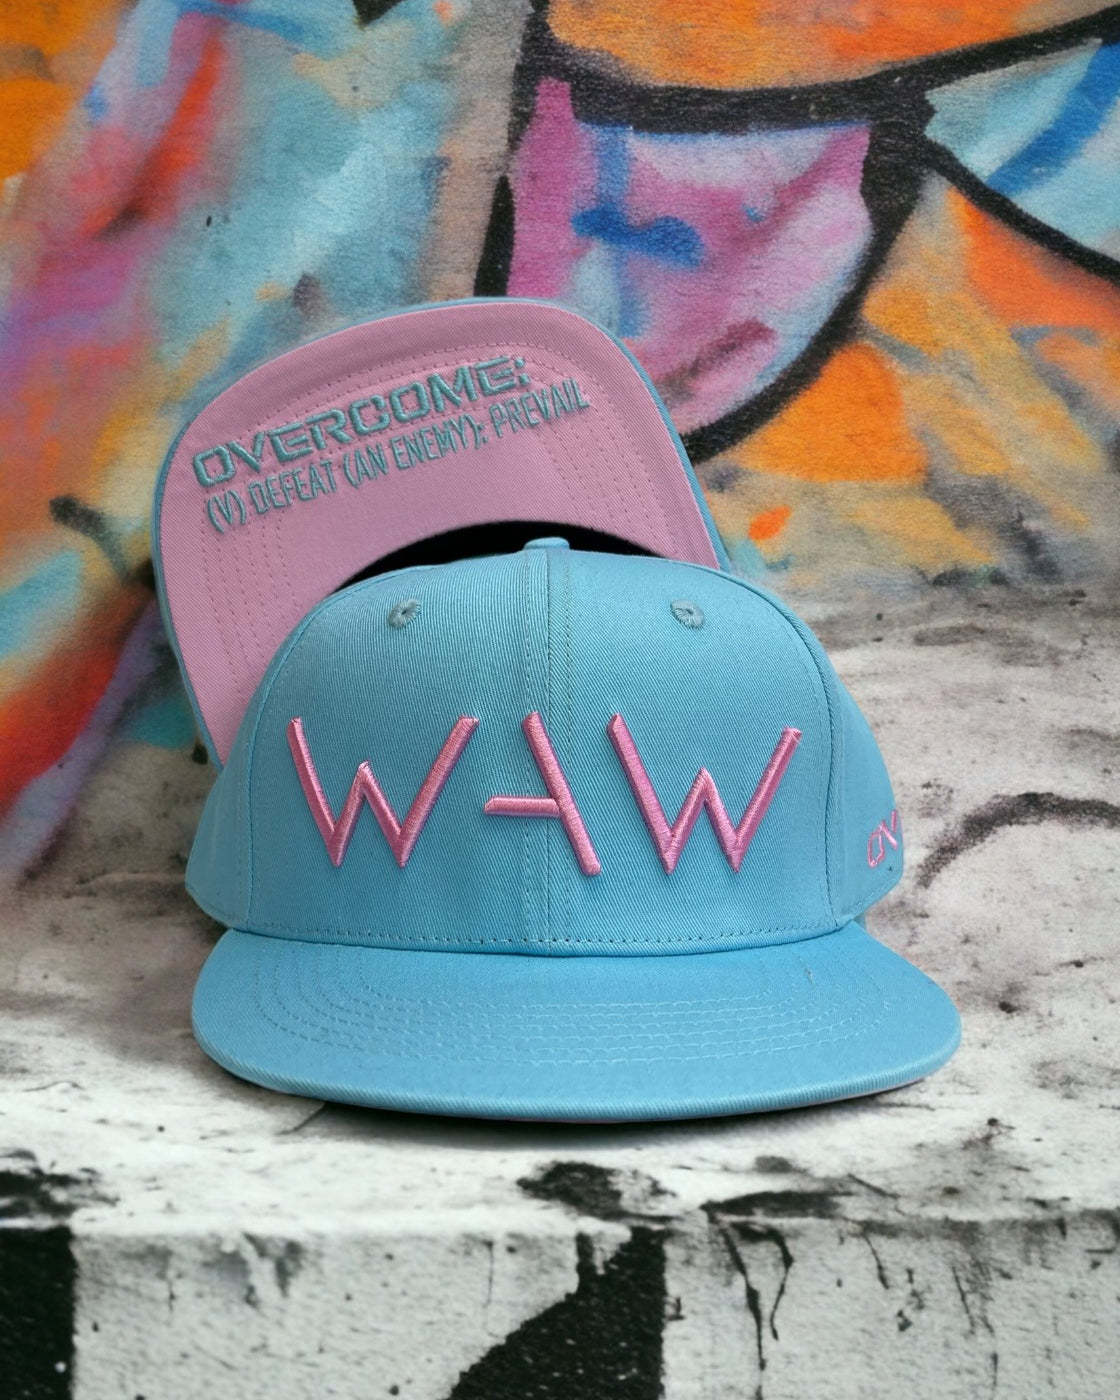 “Reaching for the Sky” Baby Blue and Pink Hat, WeAreWarriorsApparel.com